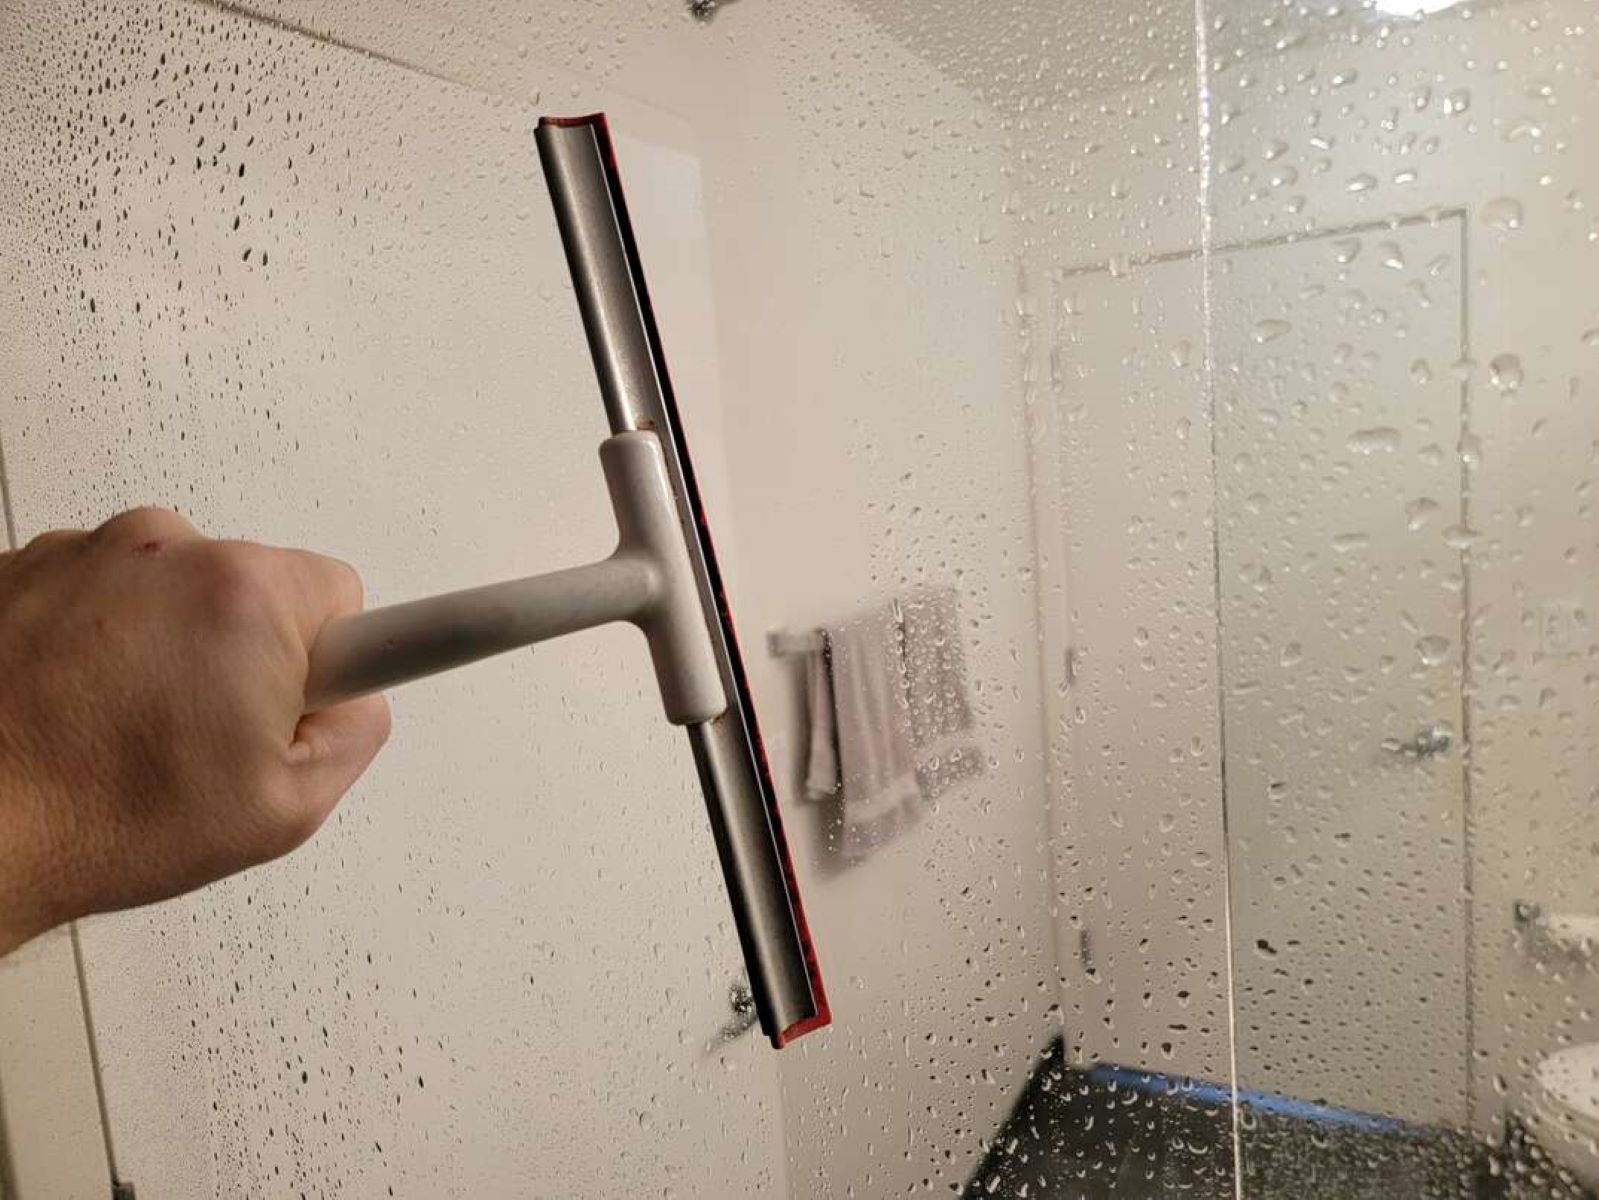 How To Prevent Soap Scum On Shower Glass